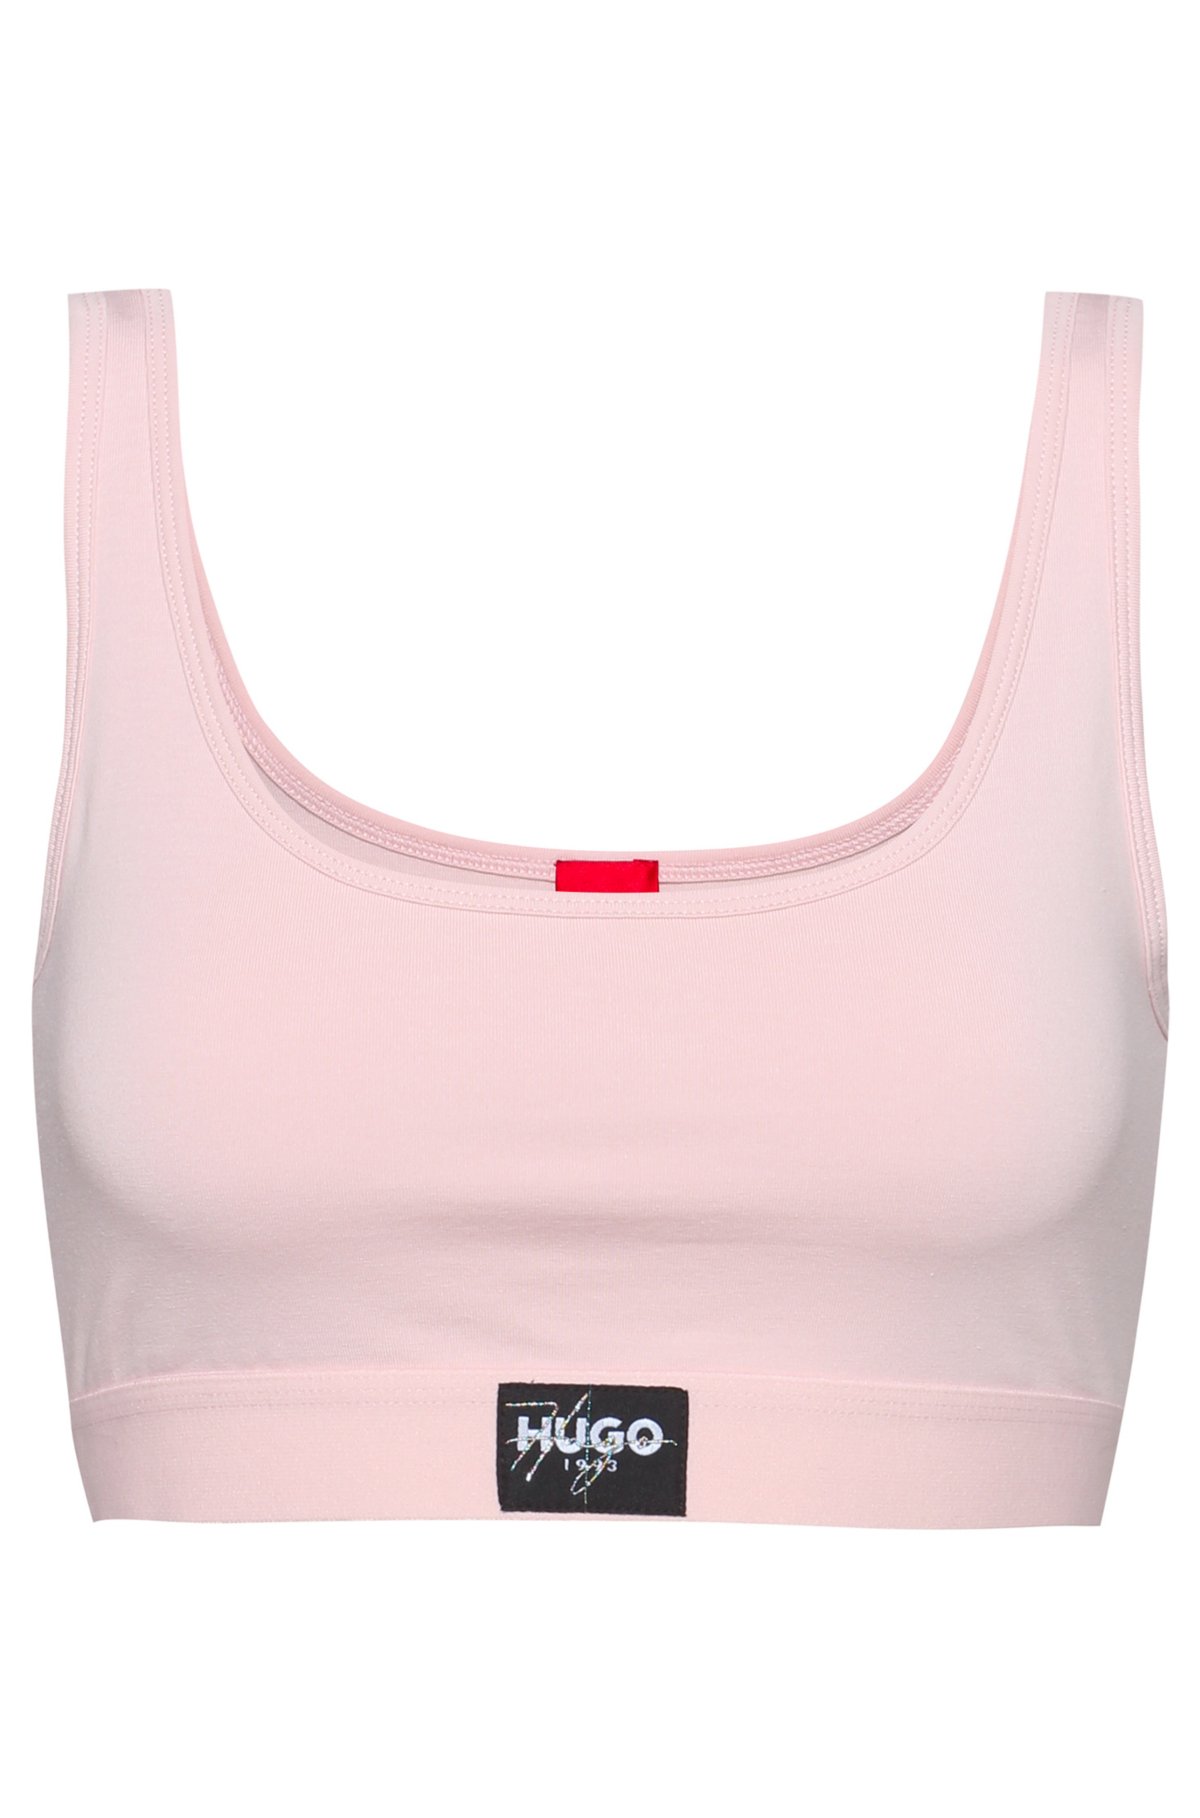 HIIT bralette with ruche detail in pink